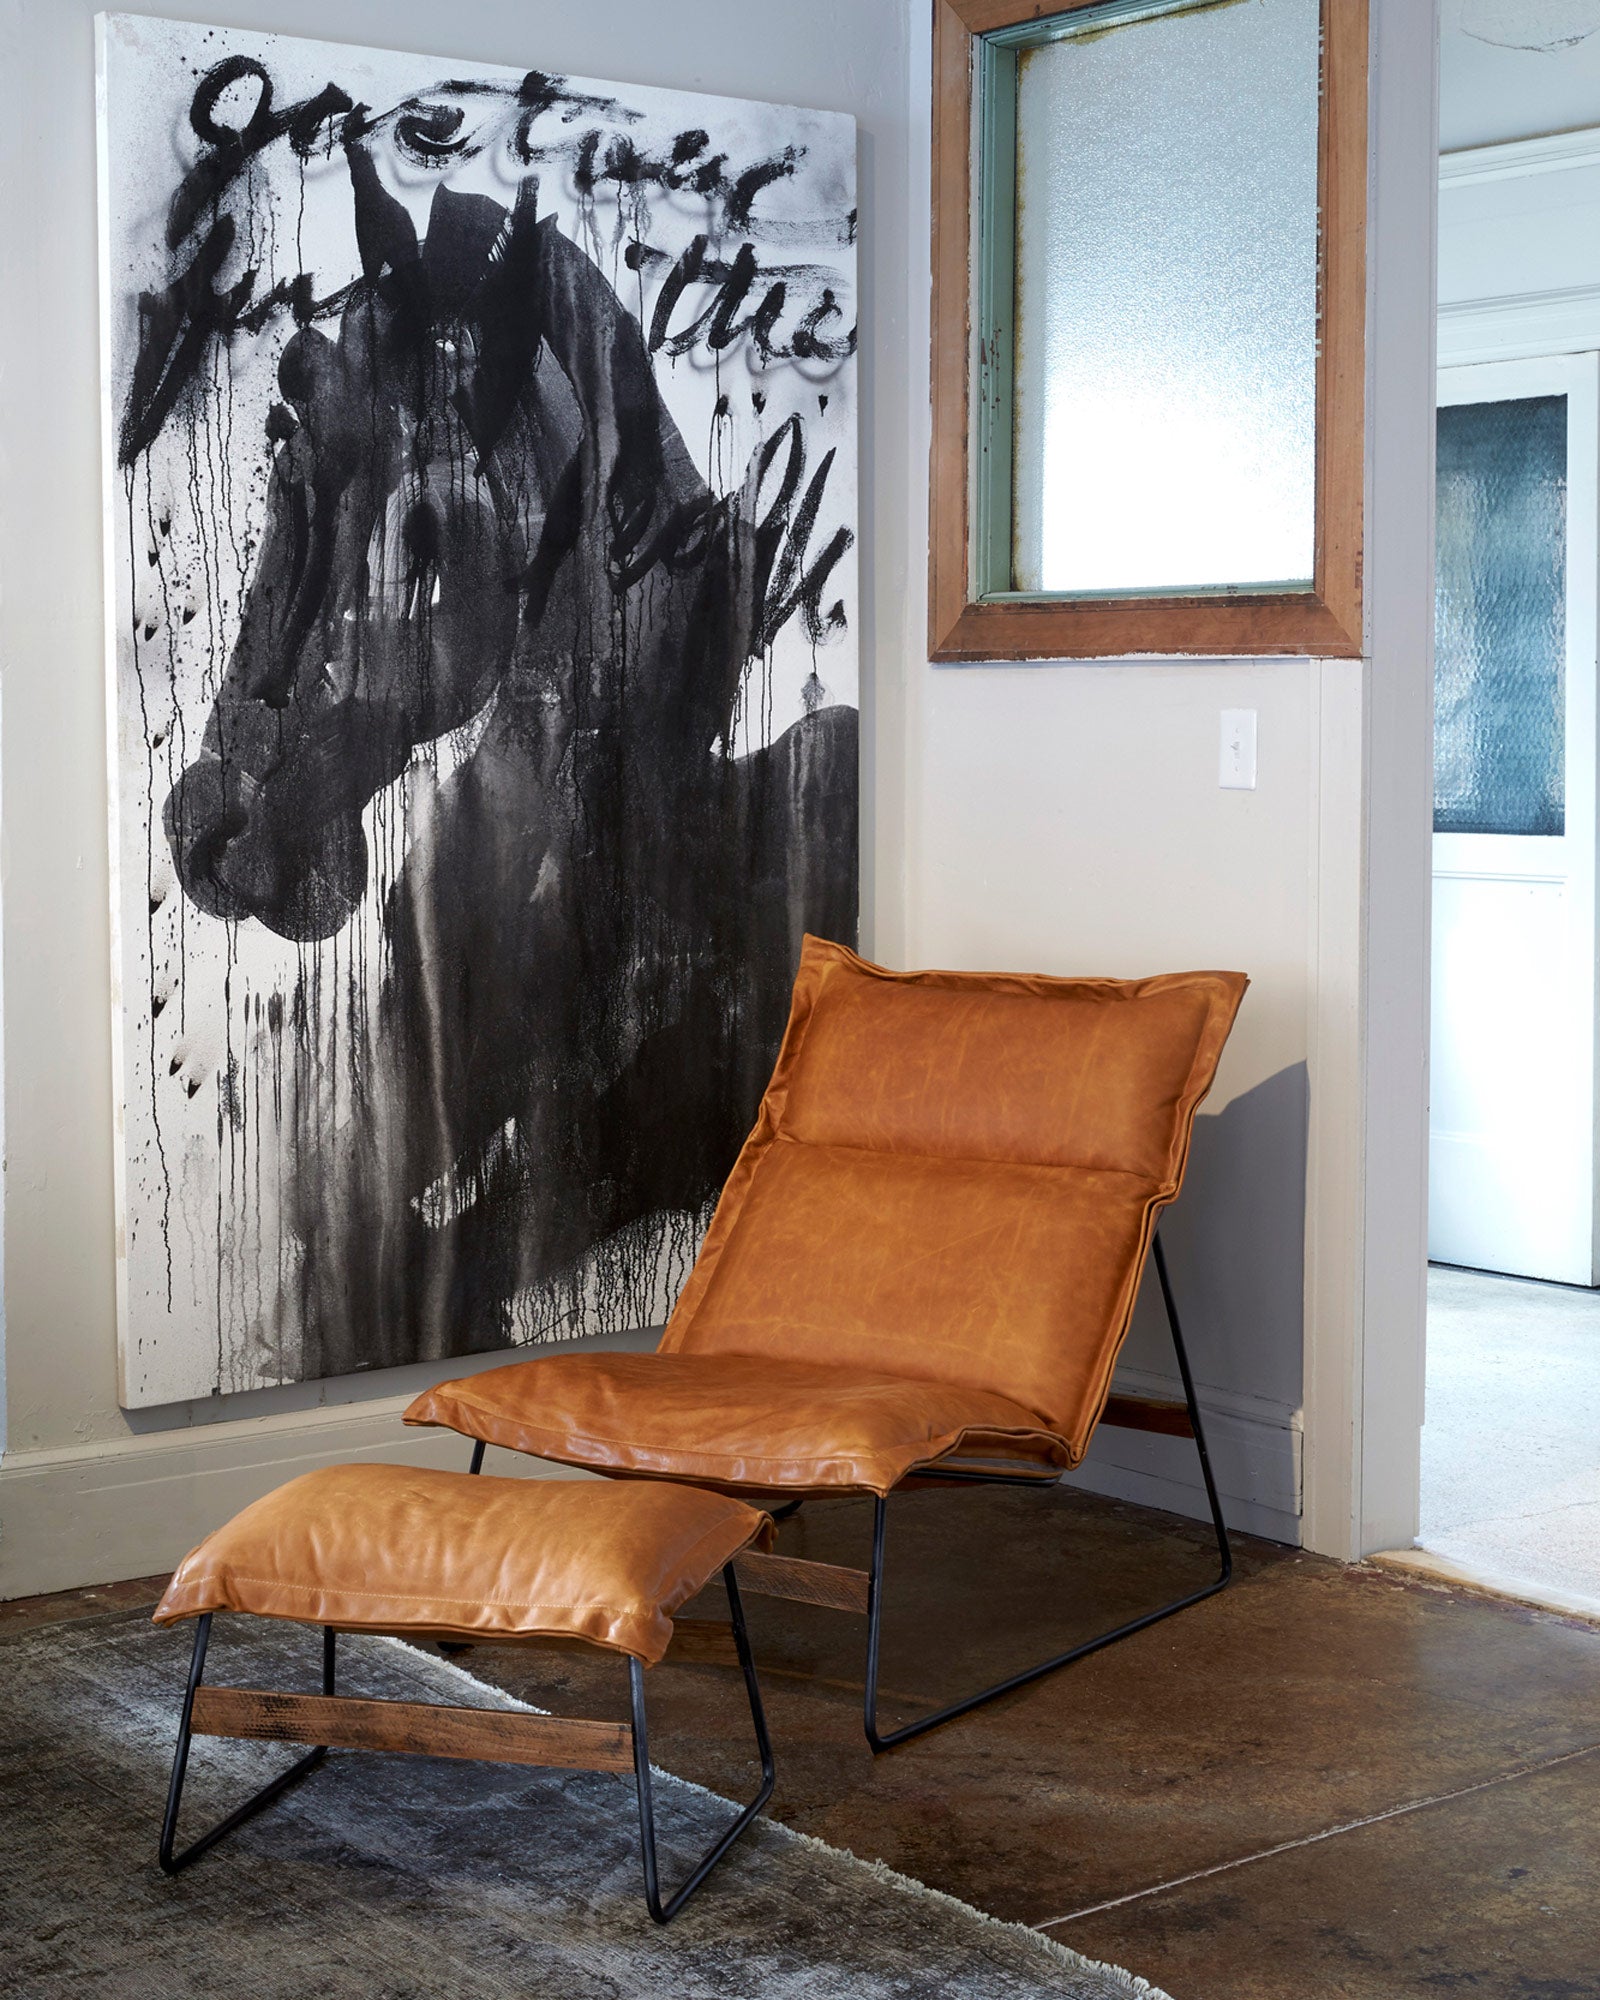  Chair in Olivo Cashew with matching ottoman. In the background is a light room with a dark horse painting and a window hanging. Photographed in Olivo Cashew. 